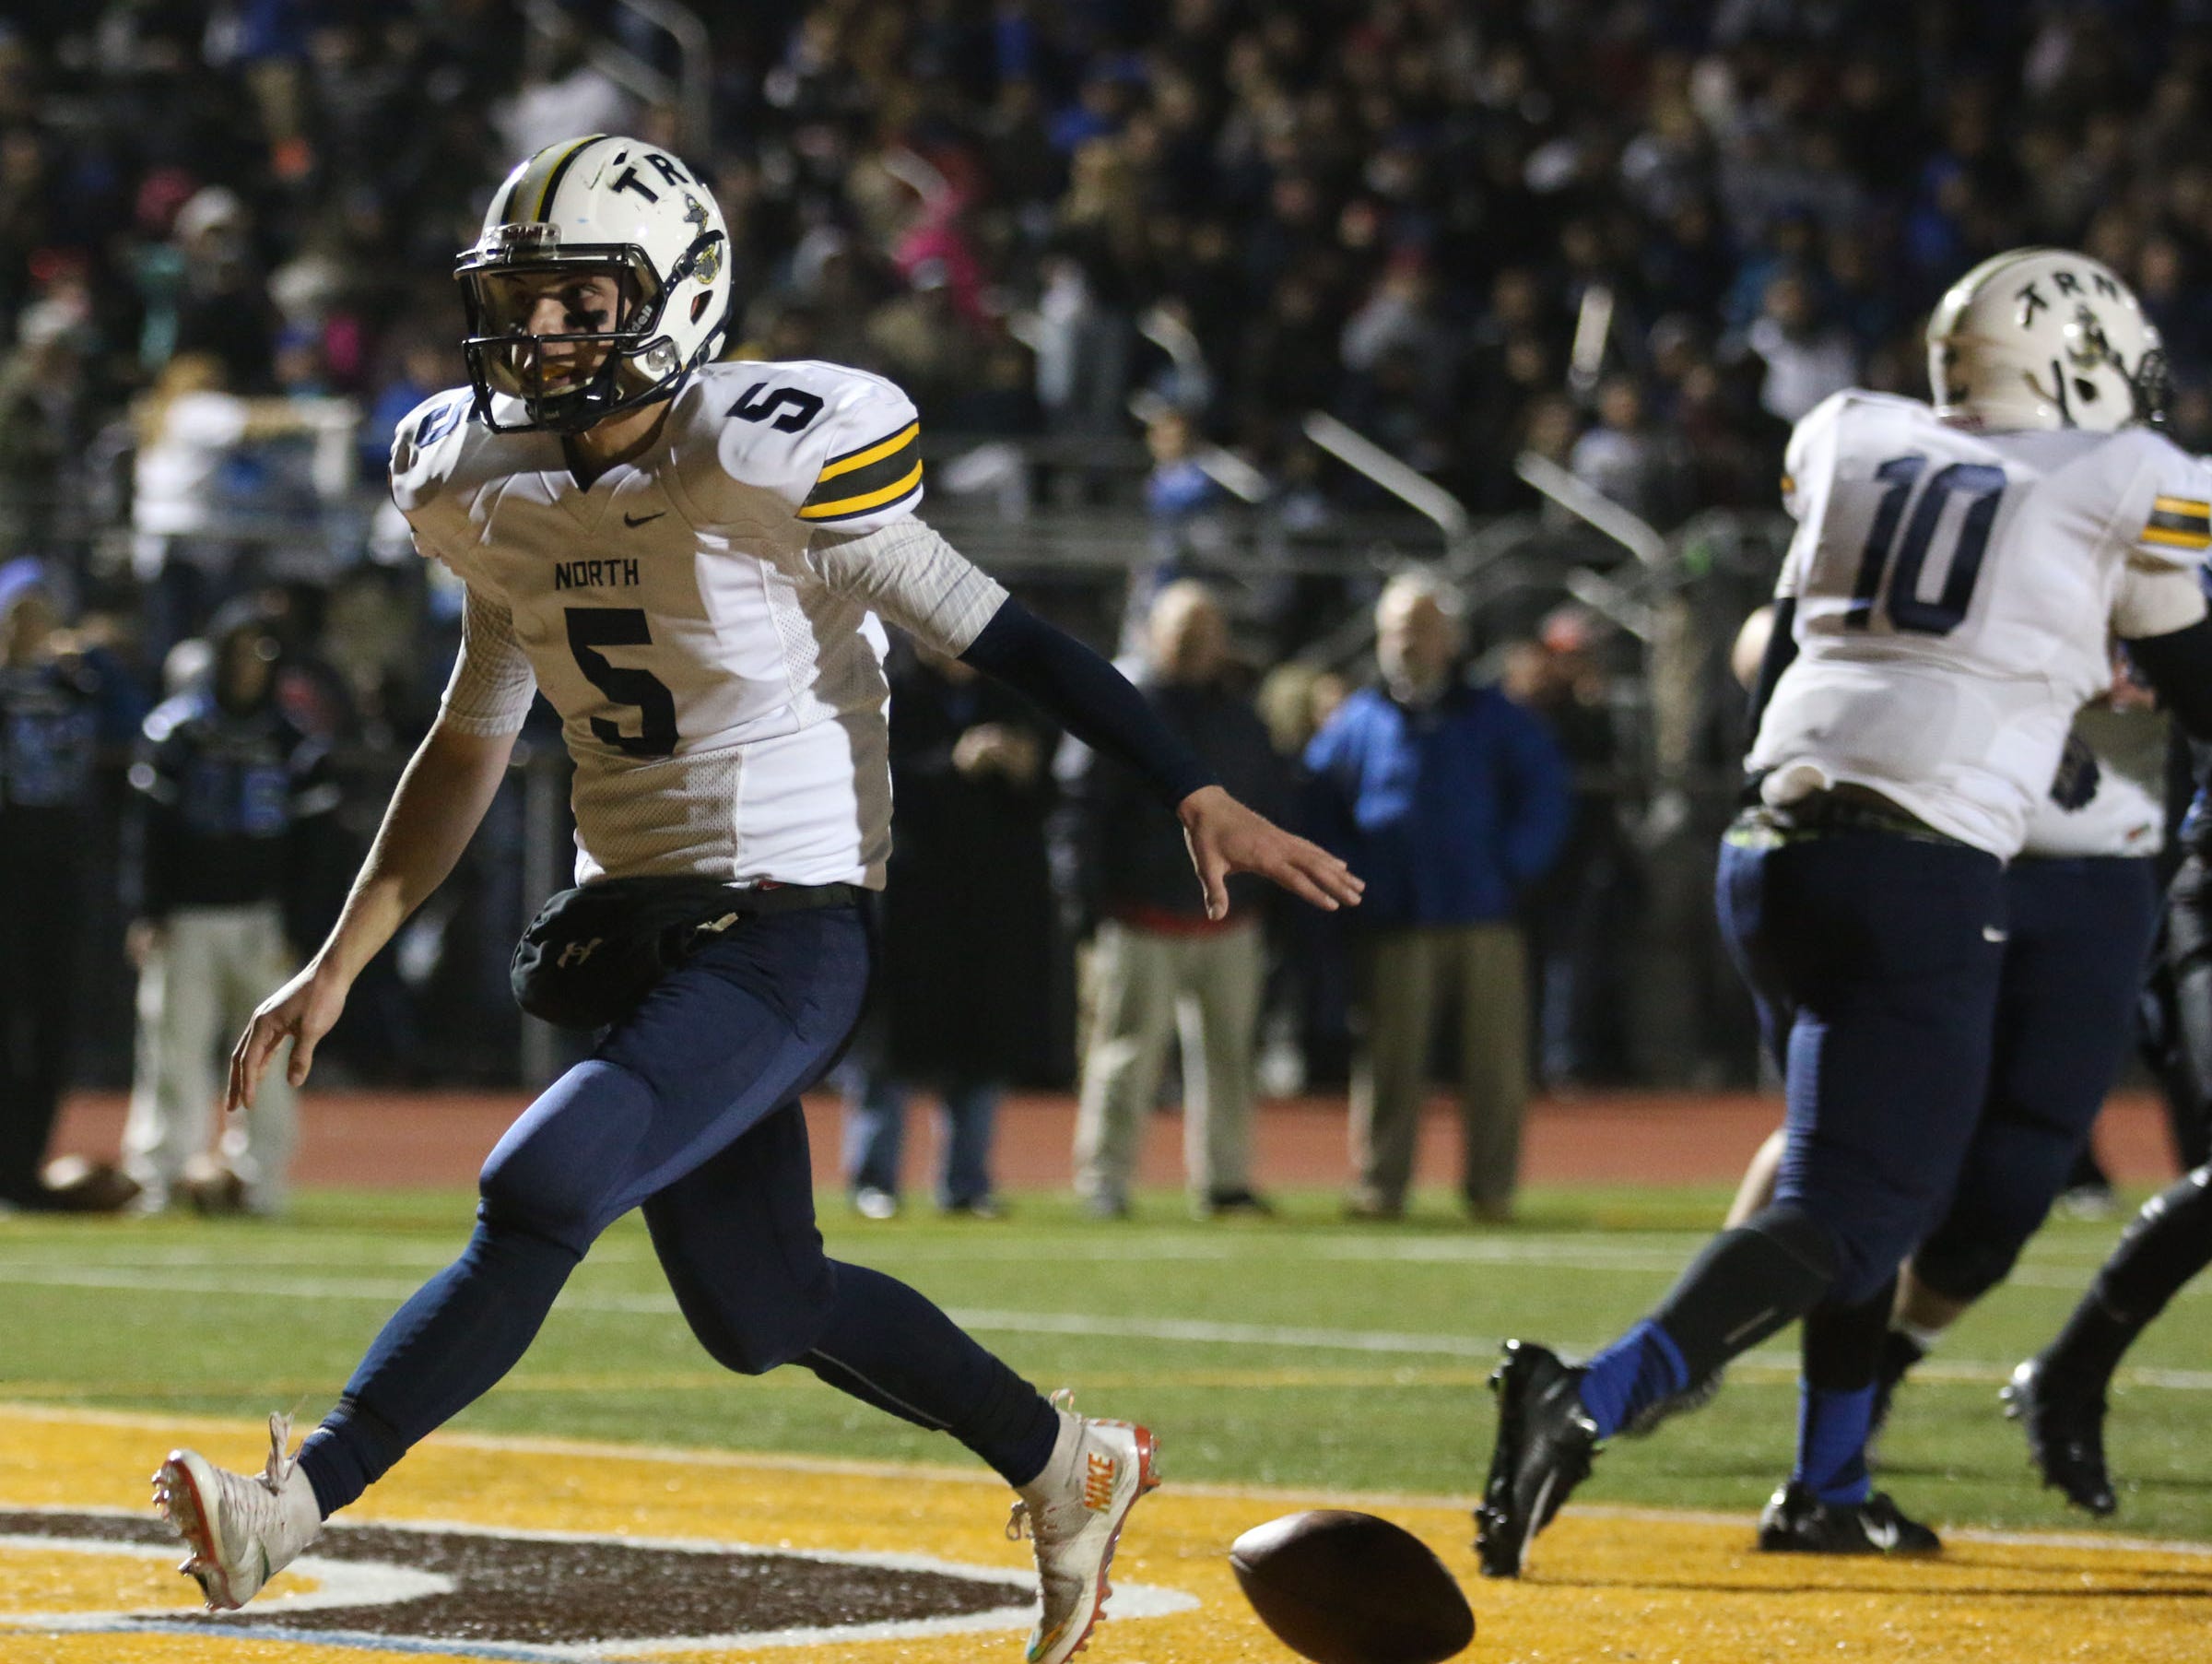 Toms River North's Michael Husni scores a touchdown. Toms River North defeats Williamstown for the NJSIAA Group V State Championship title. Glassboro, NJ Saturday, December 5, 2015 @dhoodhood